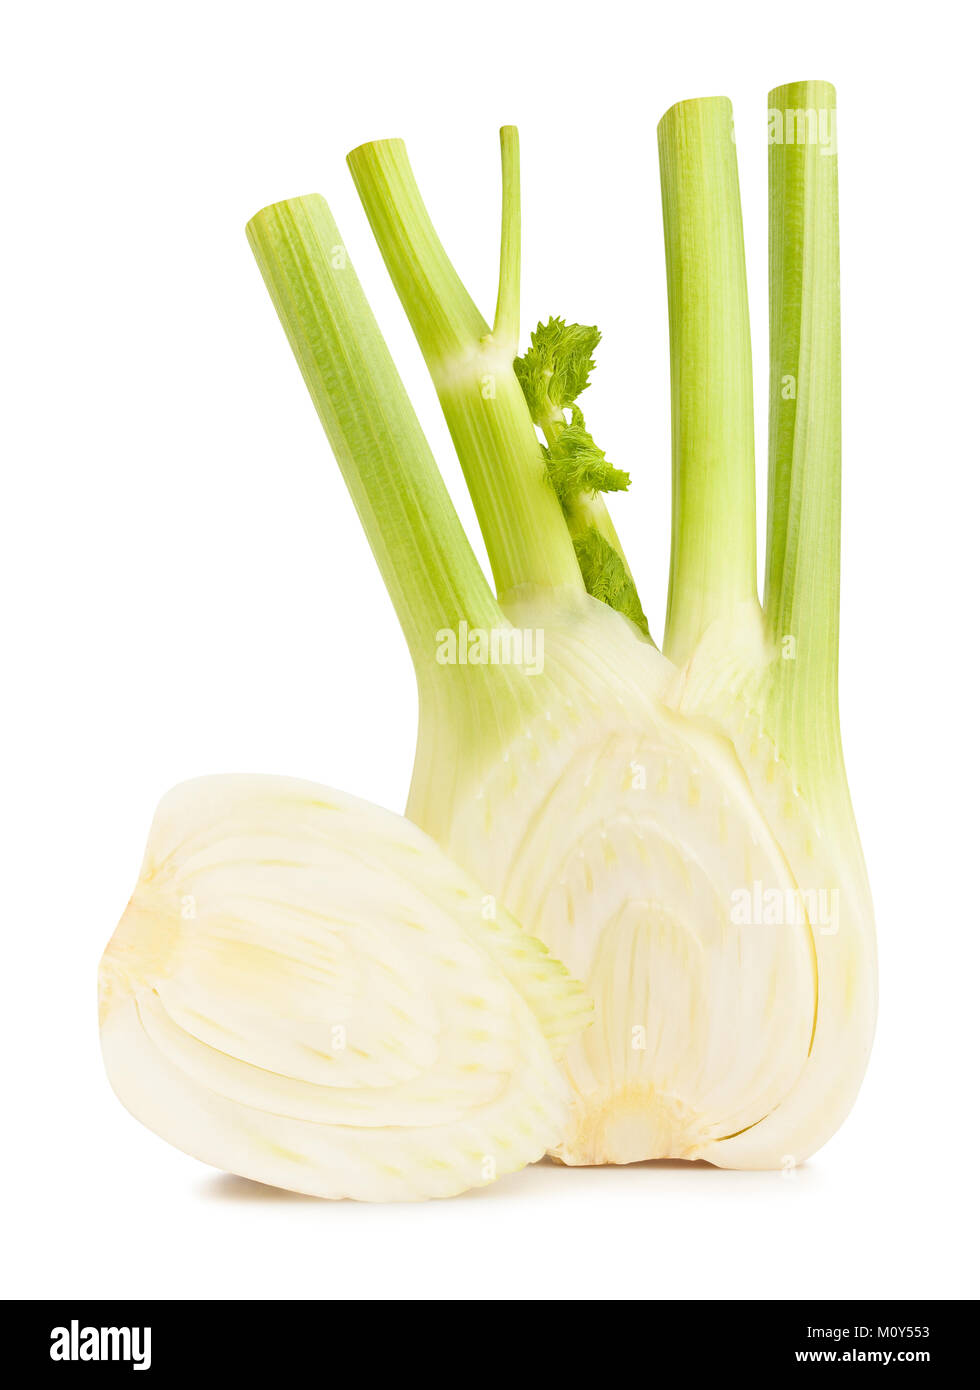 sliced fennel path isolated Stock Photo